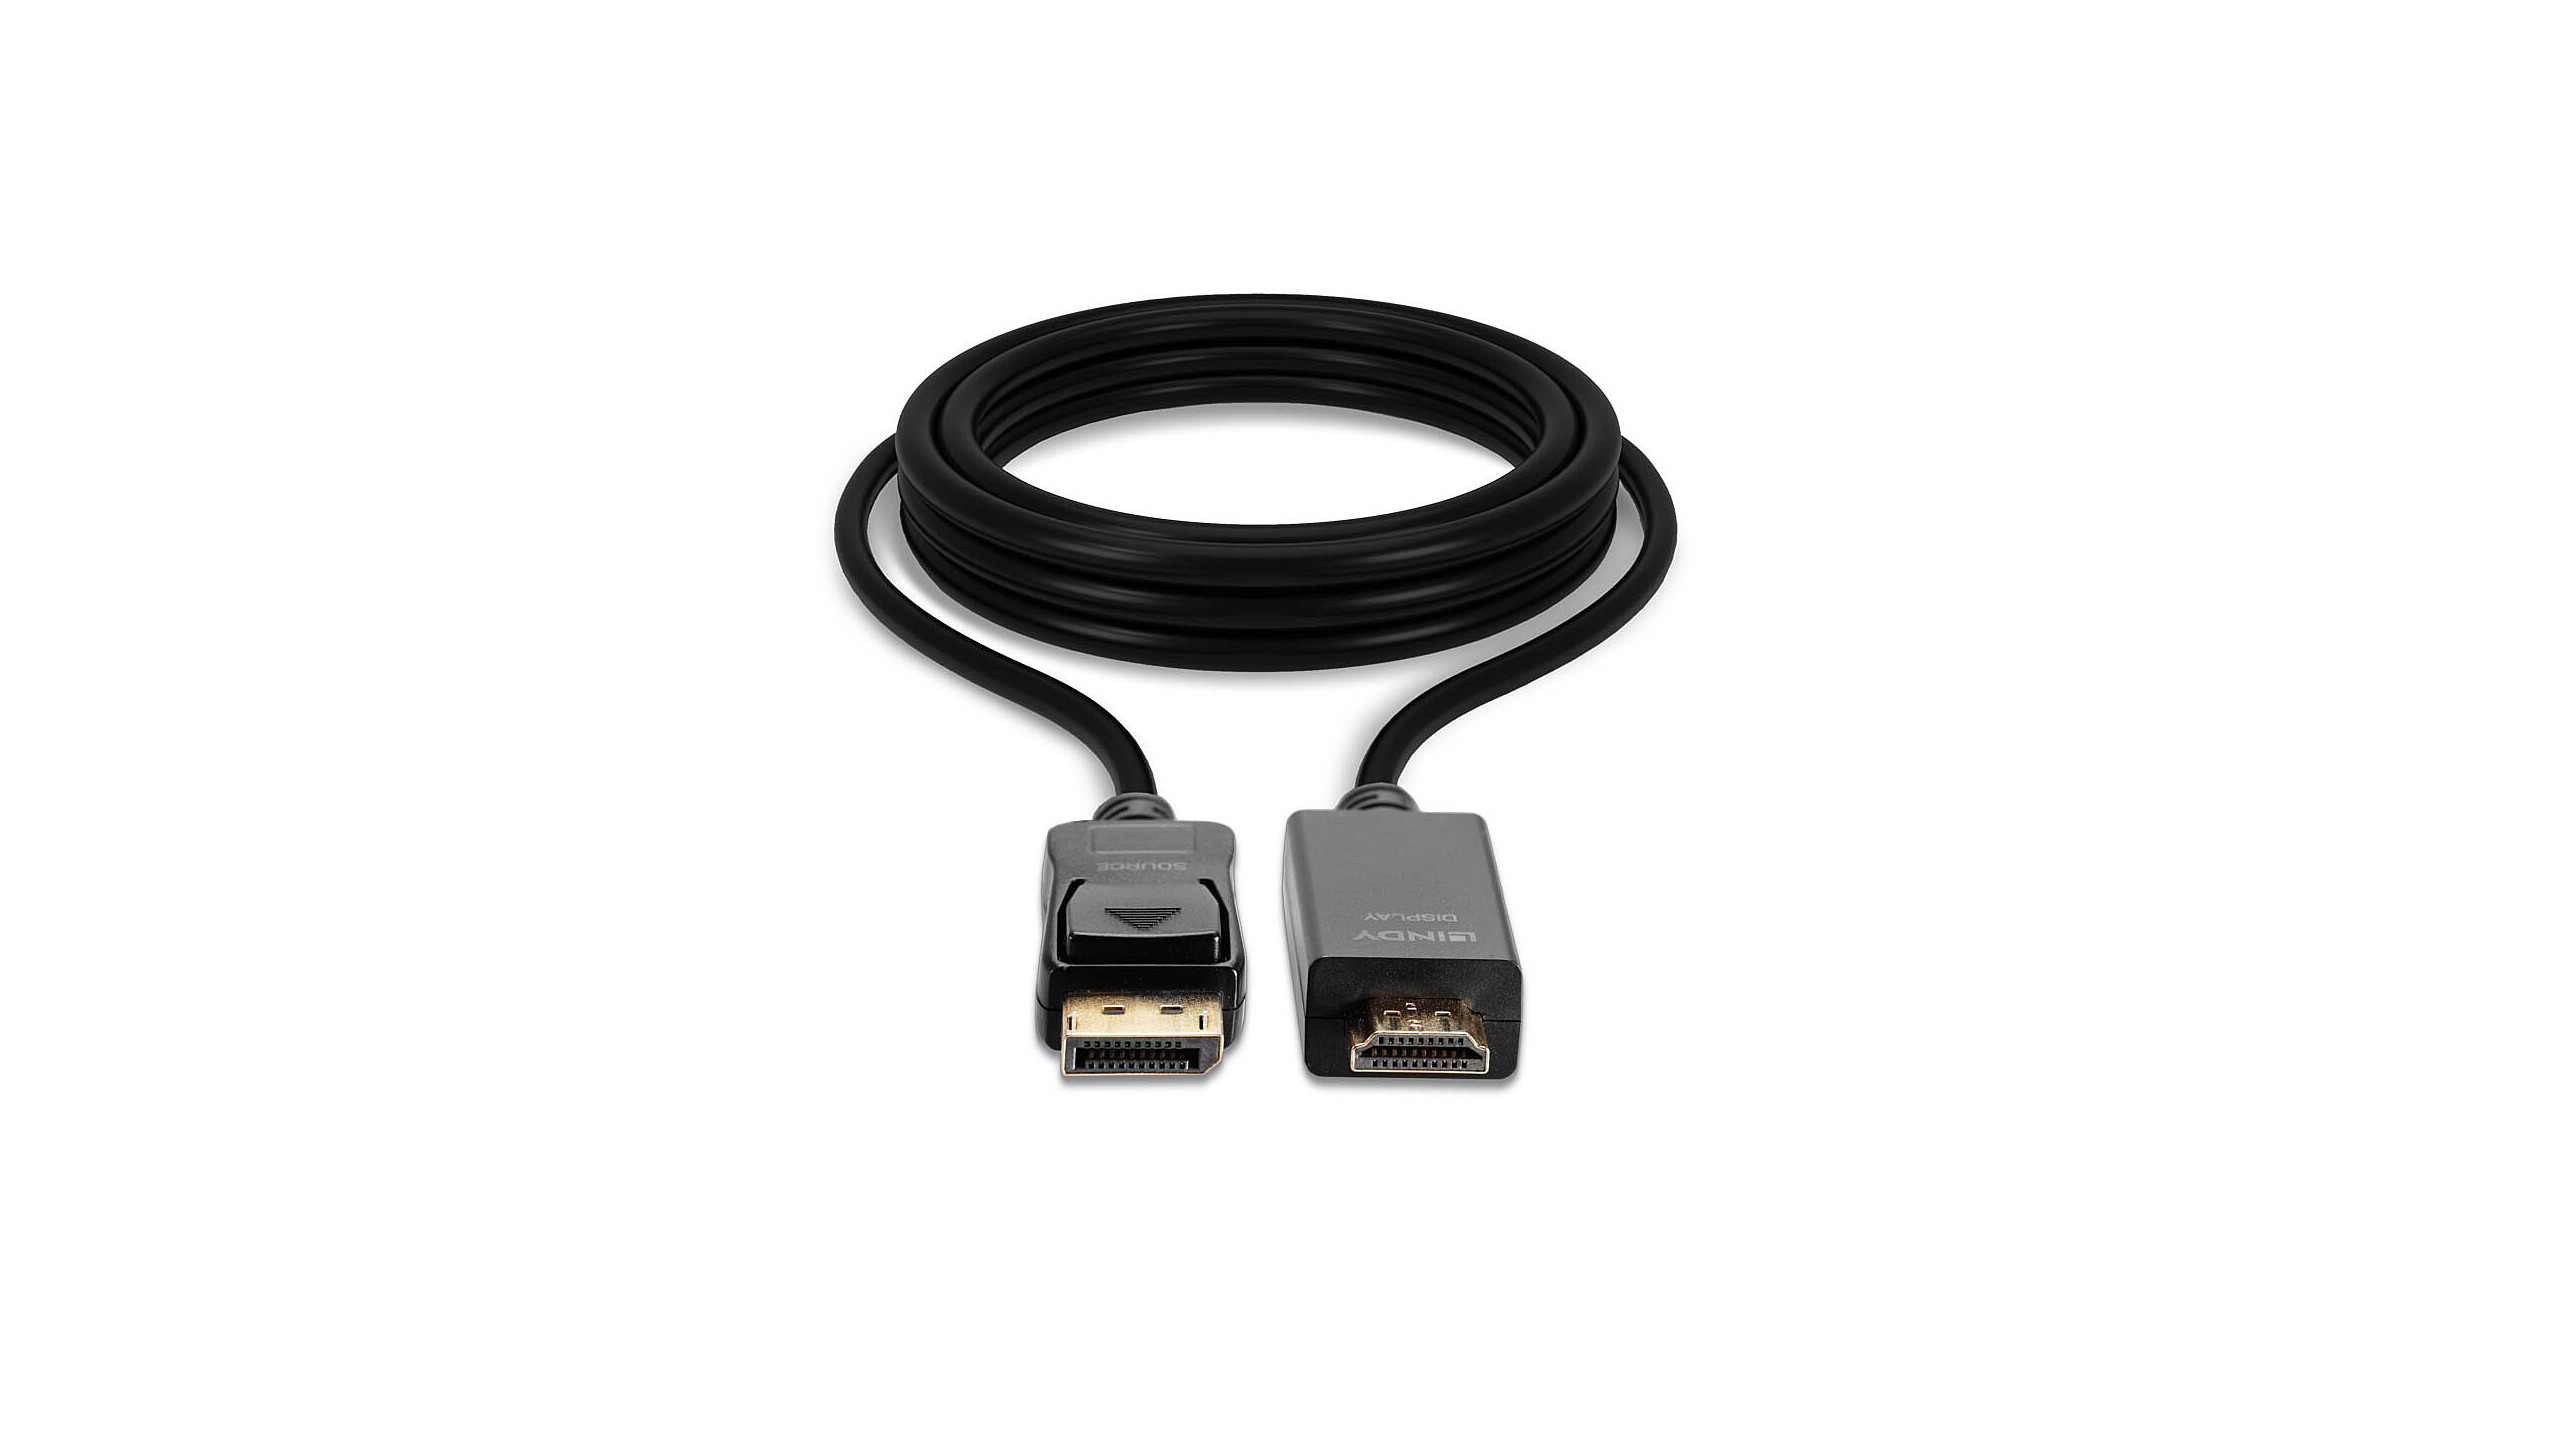 2m Lindy Serial Data Transfer Cable 